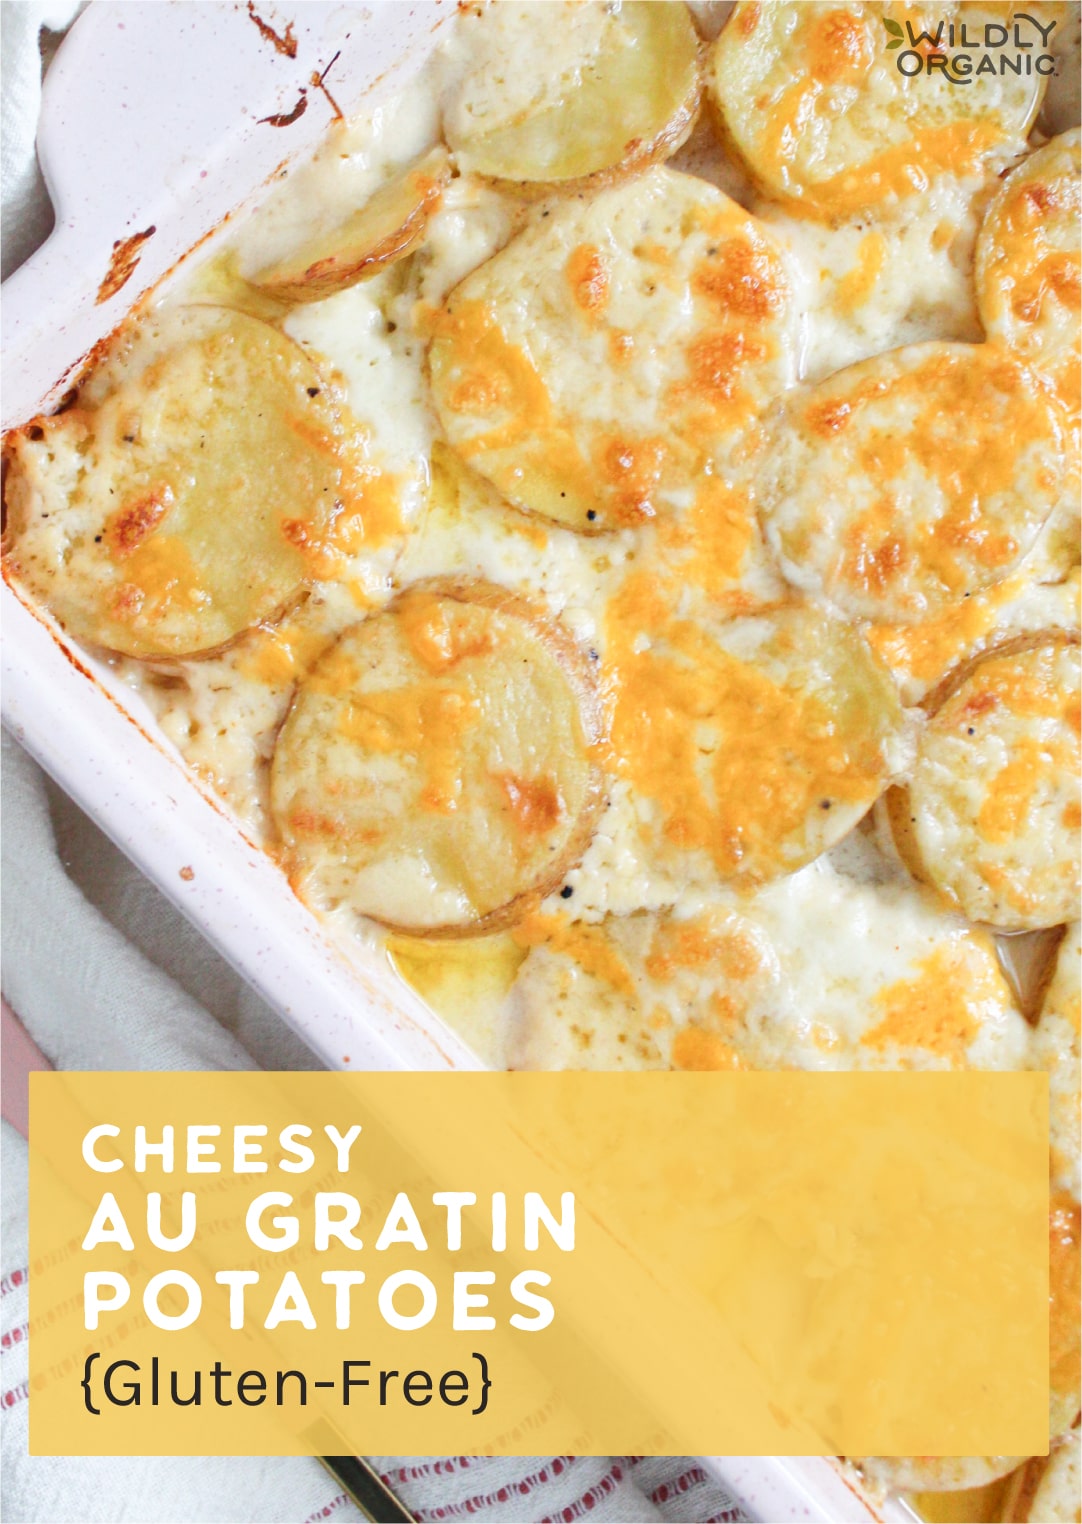 Au Gratin potatoes with cheese in a white container